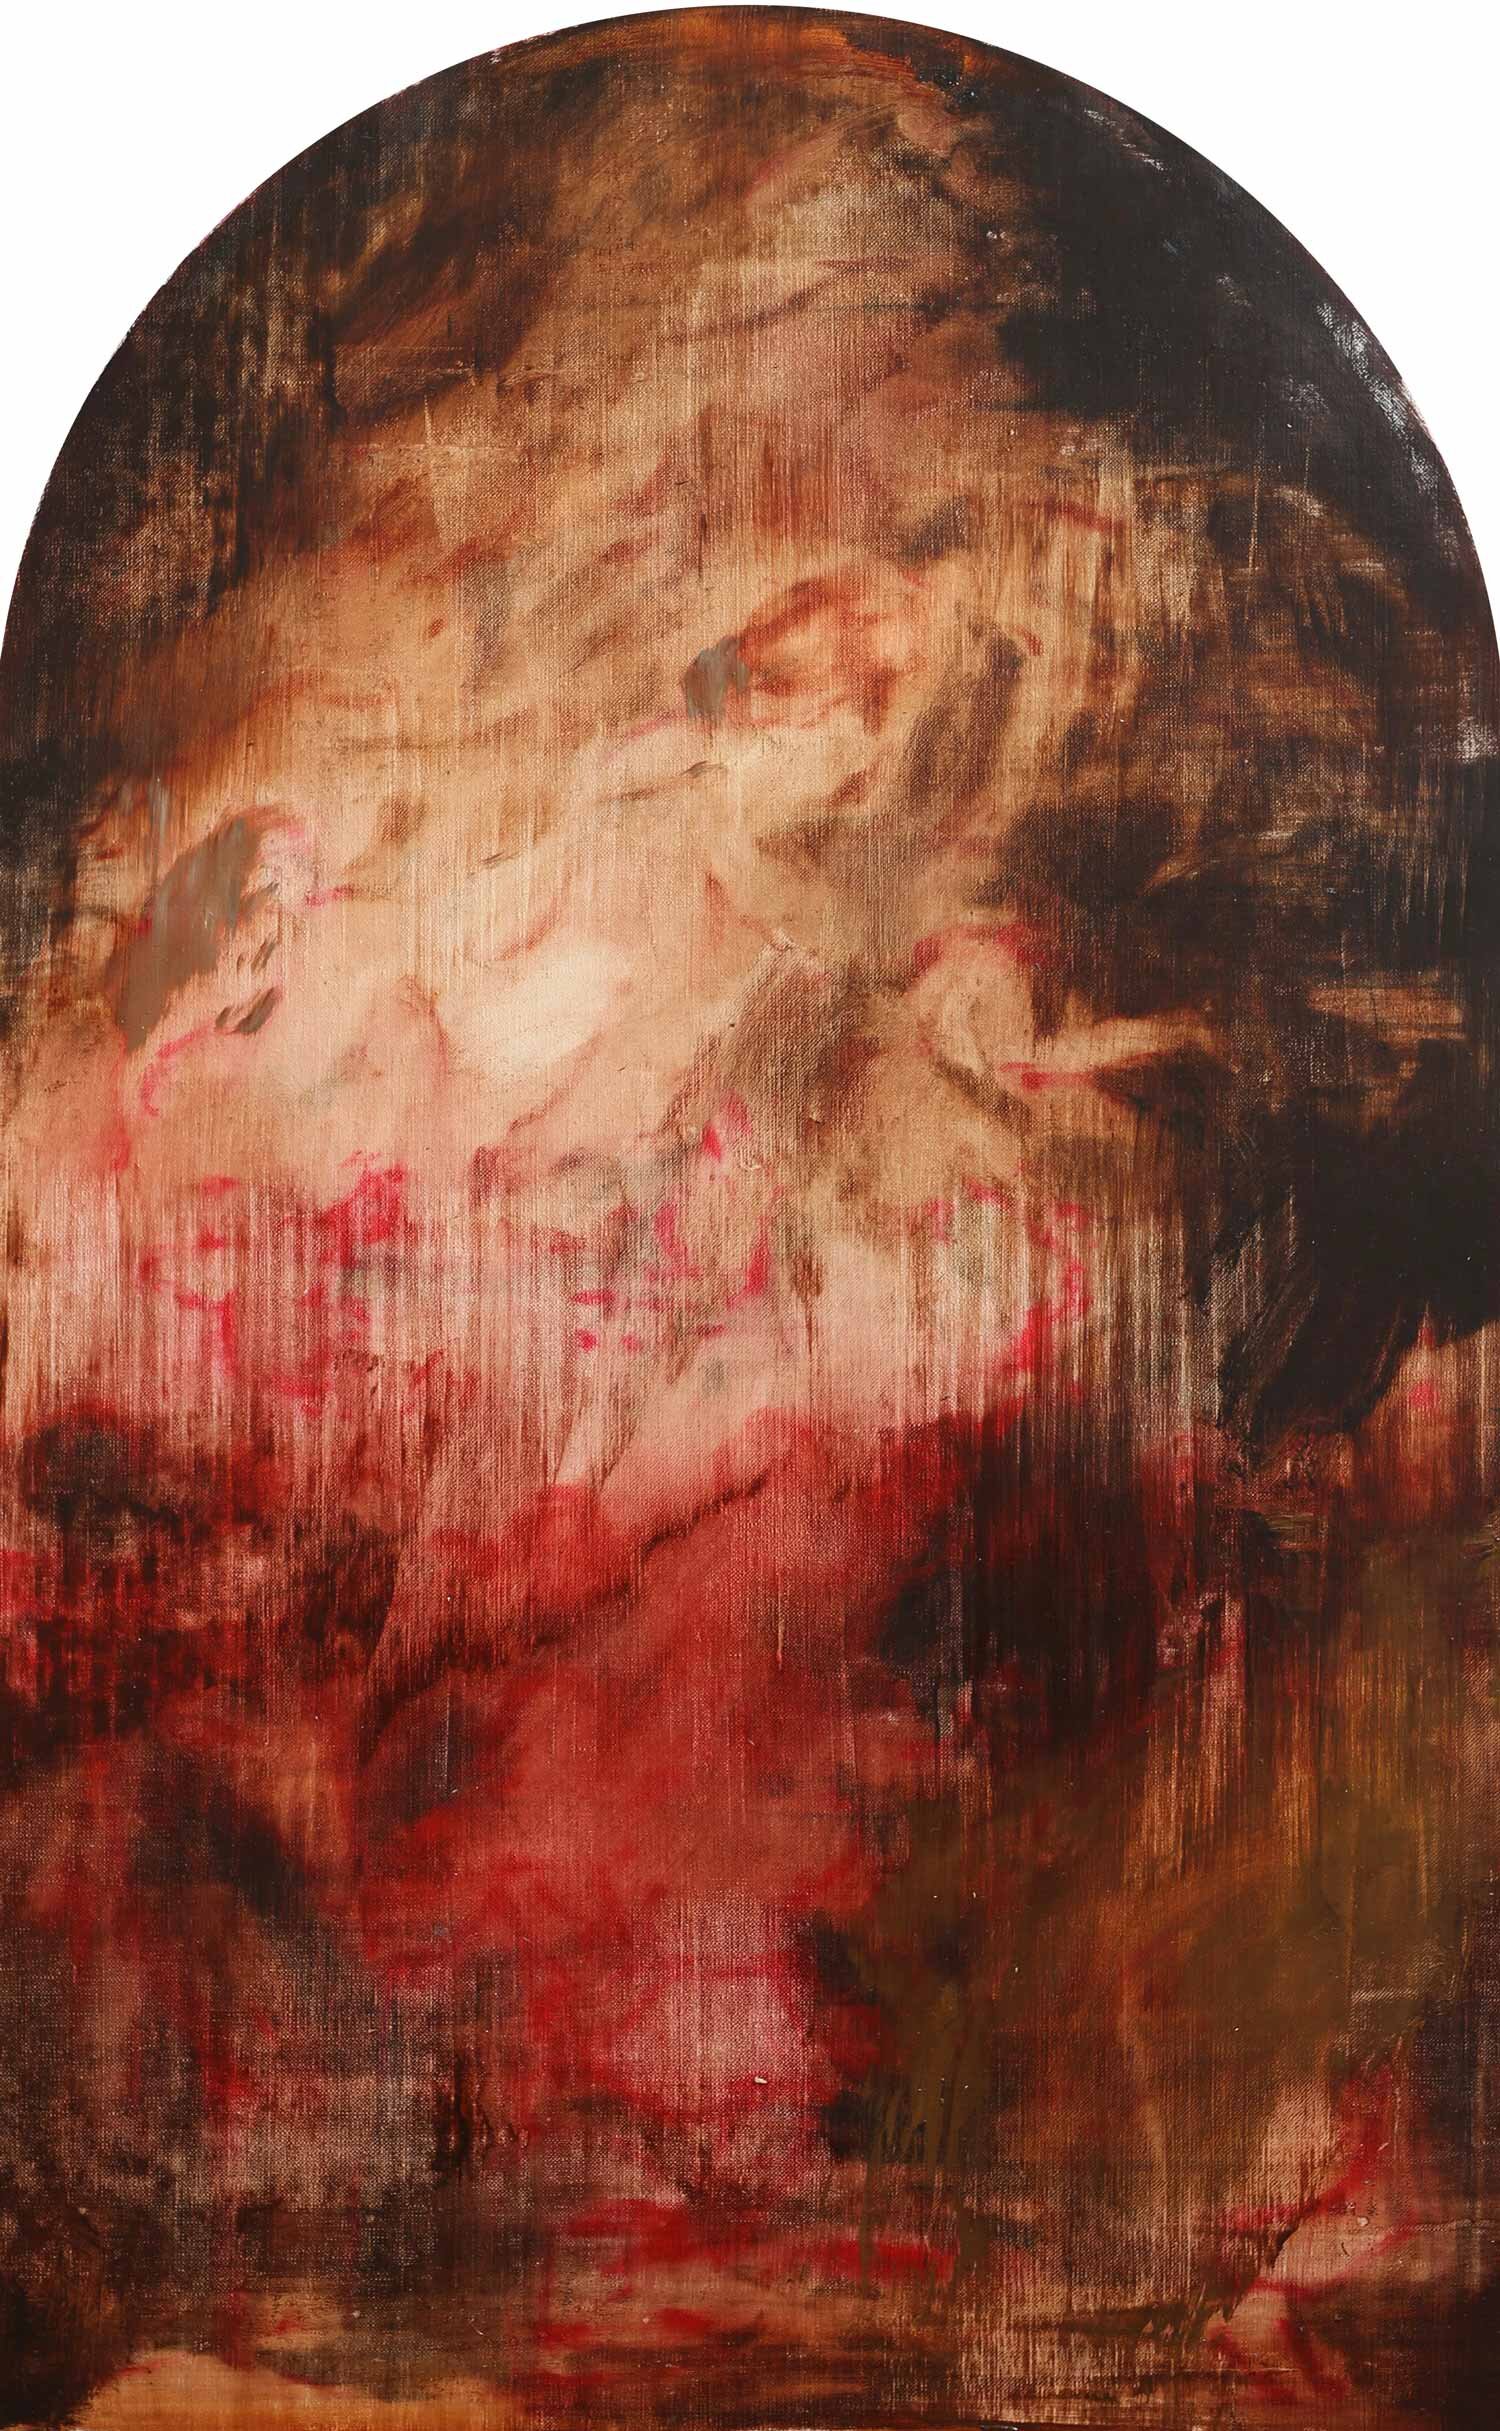 Study for The Assumption of the Virgin Mary, with Cadmium Red, after Rubens, 59x89.5cm